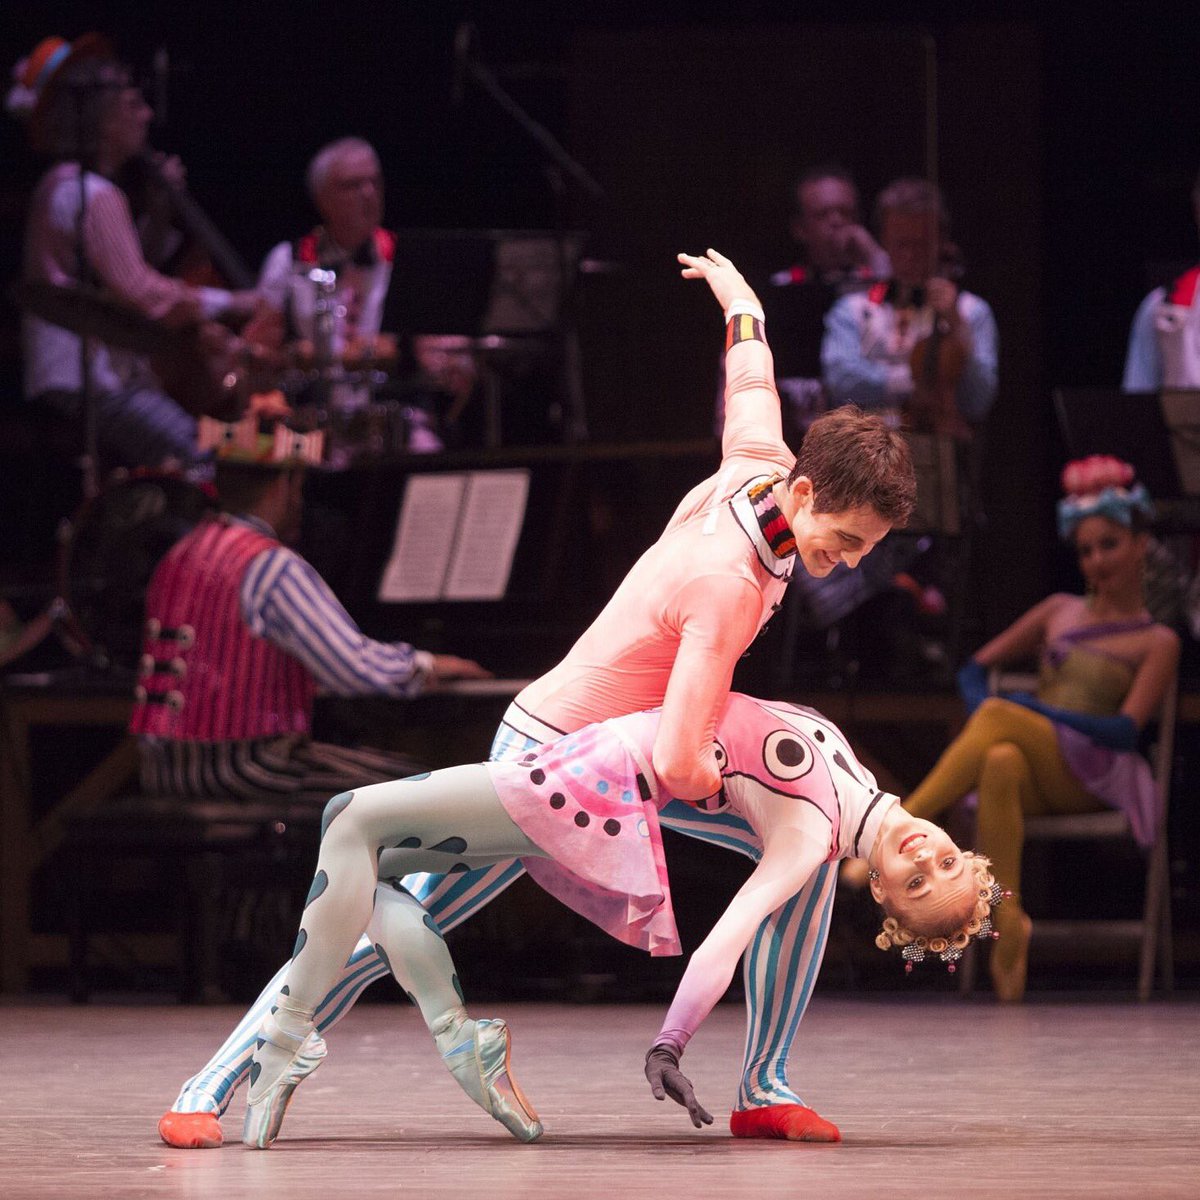 Can't wait to perform Elite Syncopations tonight with the  @RoyalOperaHouse @scottishballet @ENBallet @northernballet @BRB #ROHmacmillan